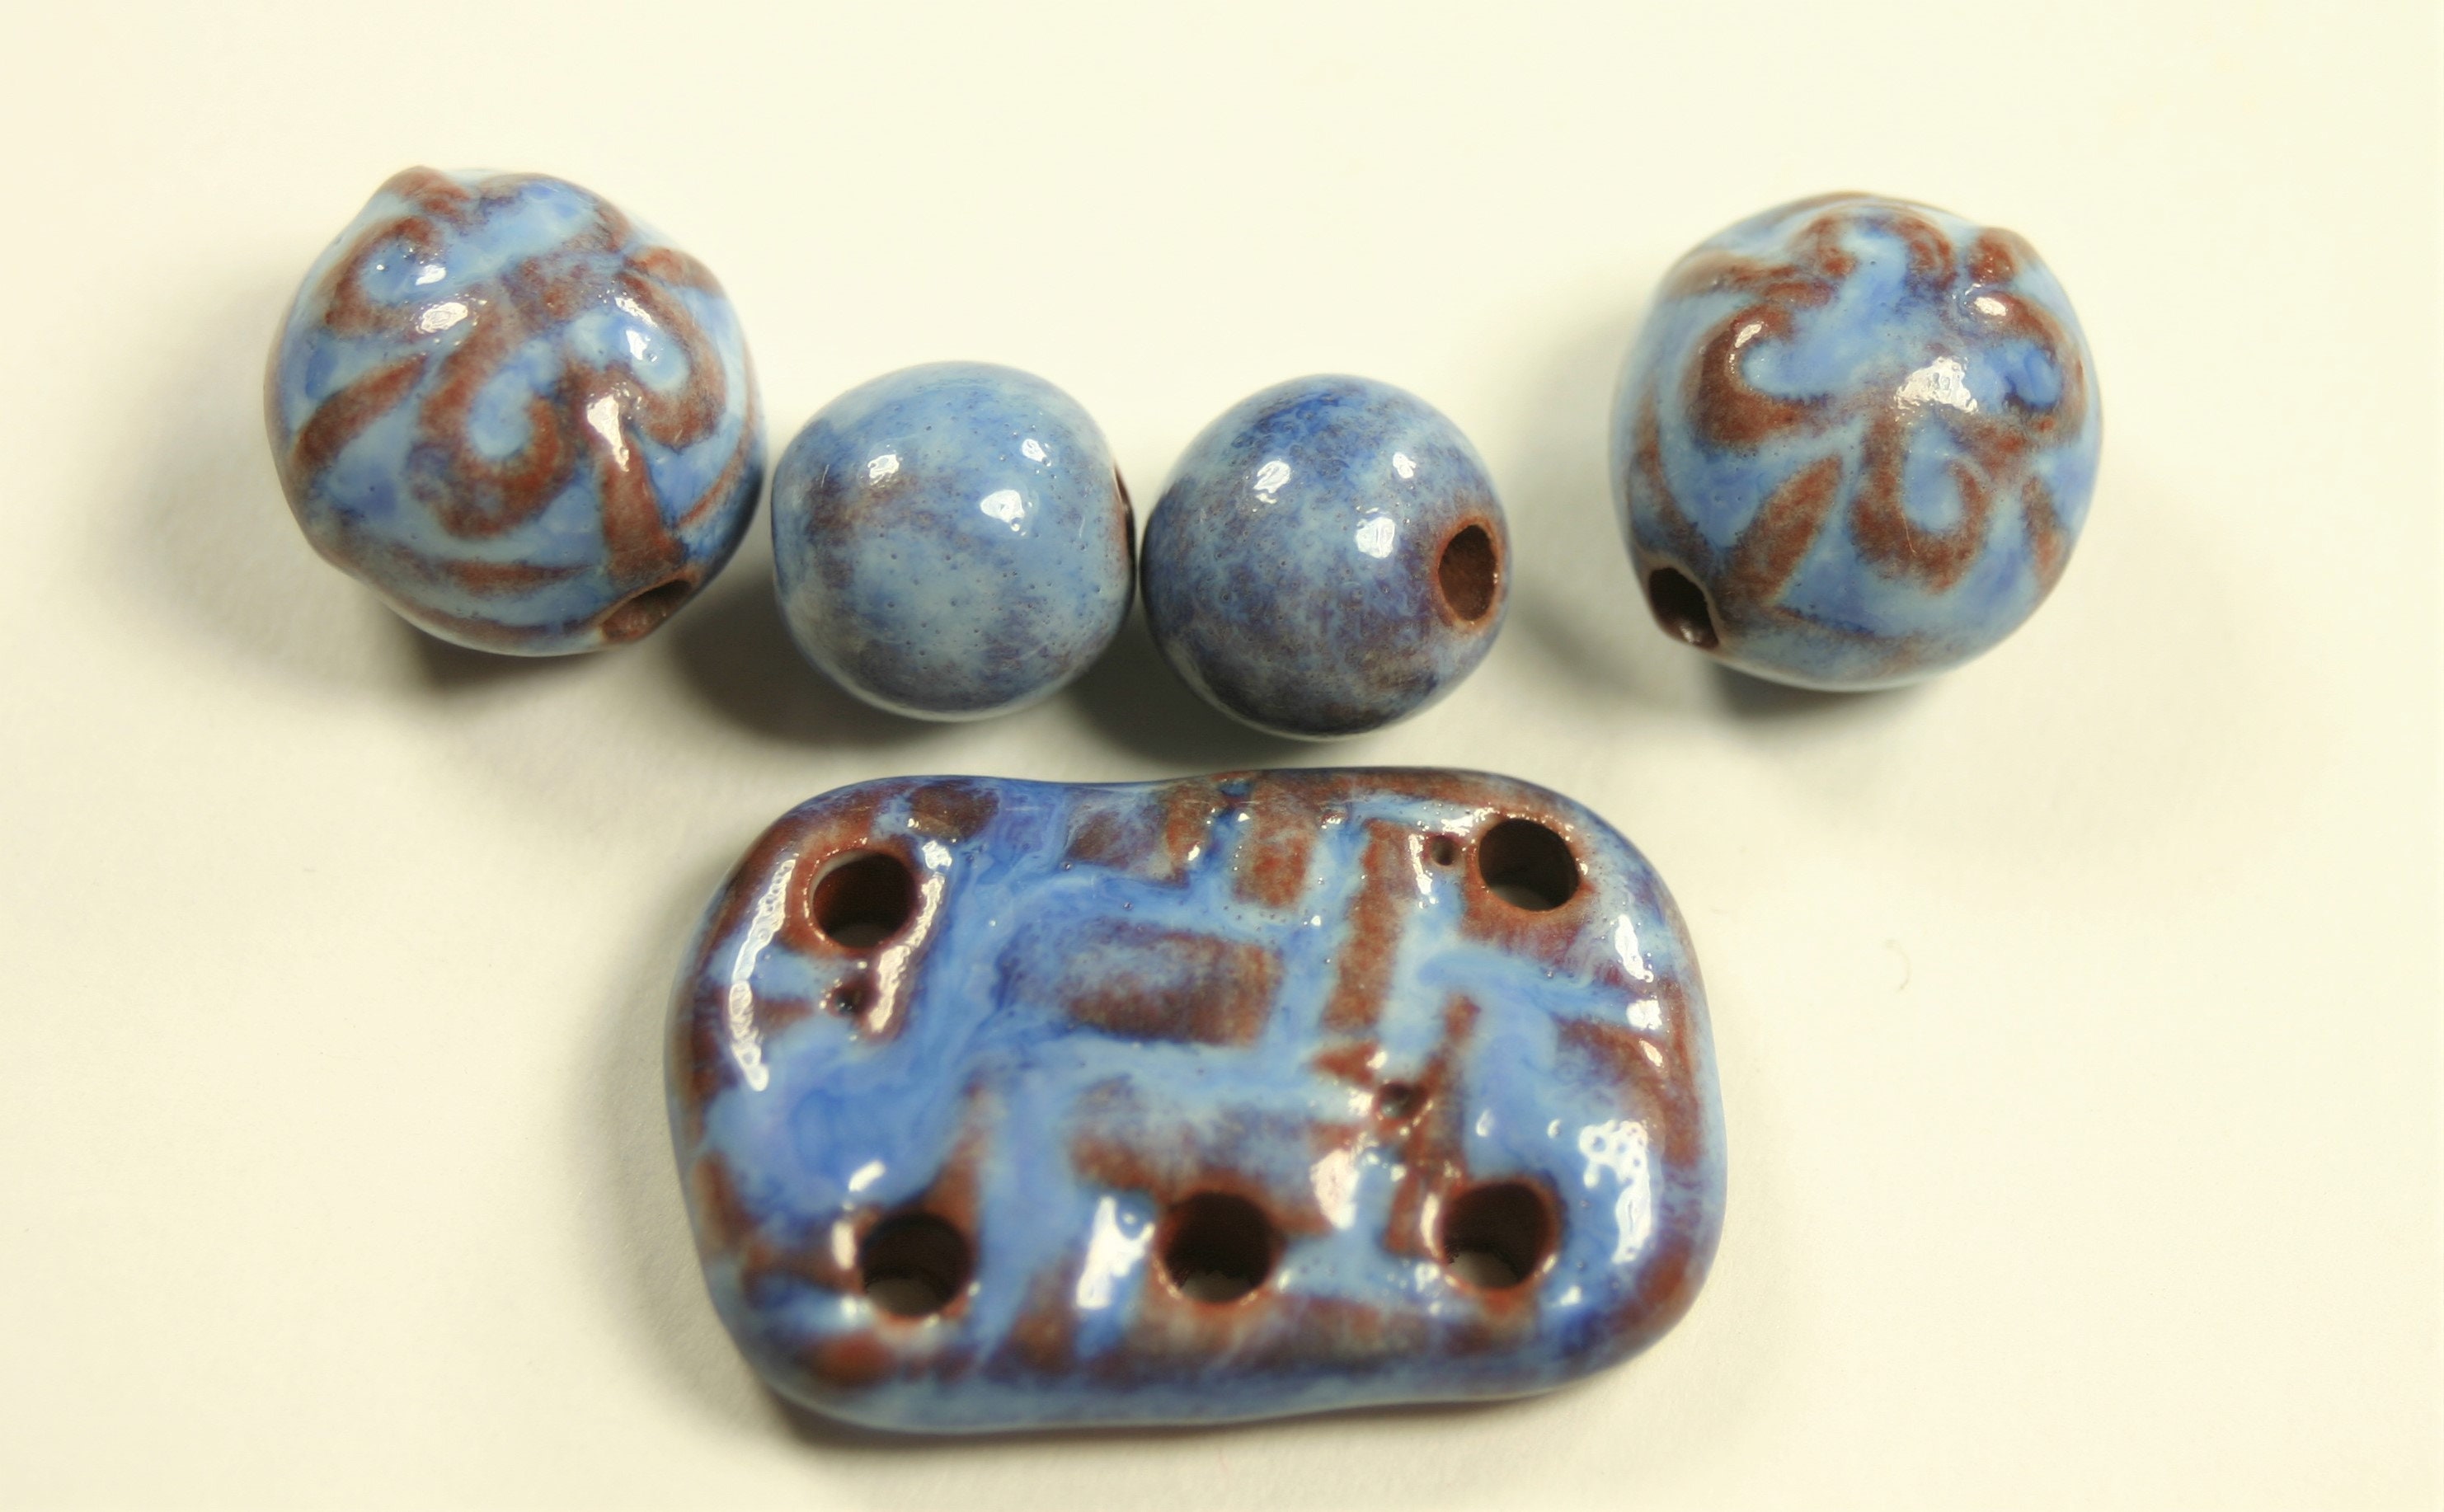 Blue and Brown Speckled Glass Beads Extra Long 31 Strand of 8mm Beads for  Jewelry Making 